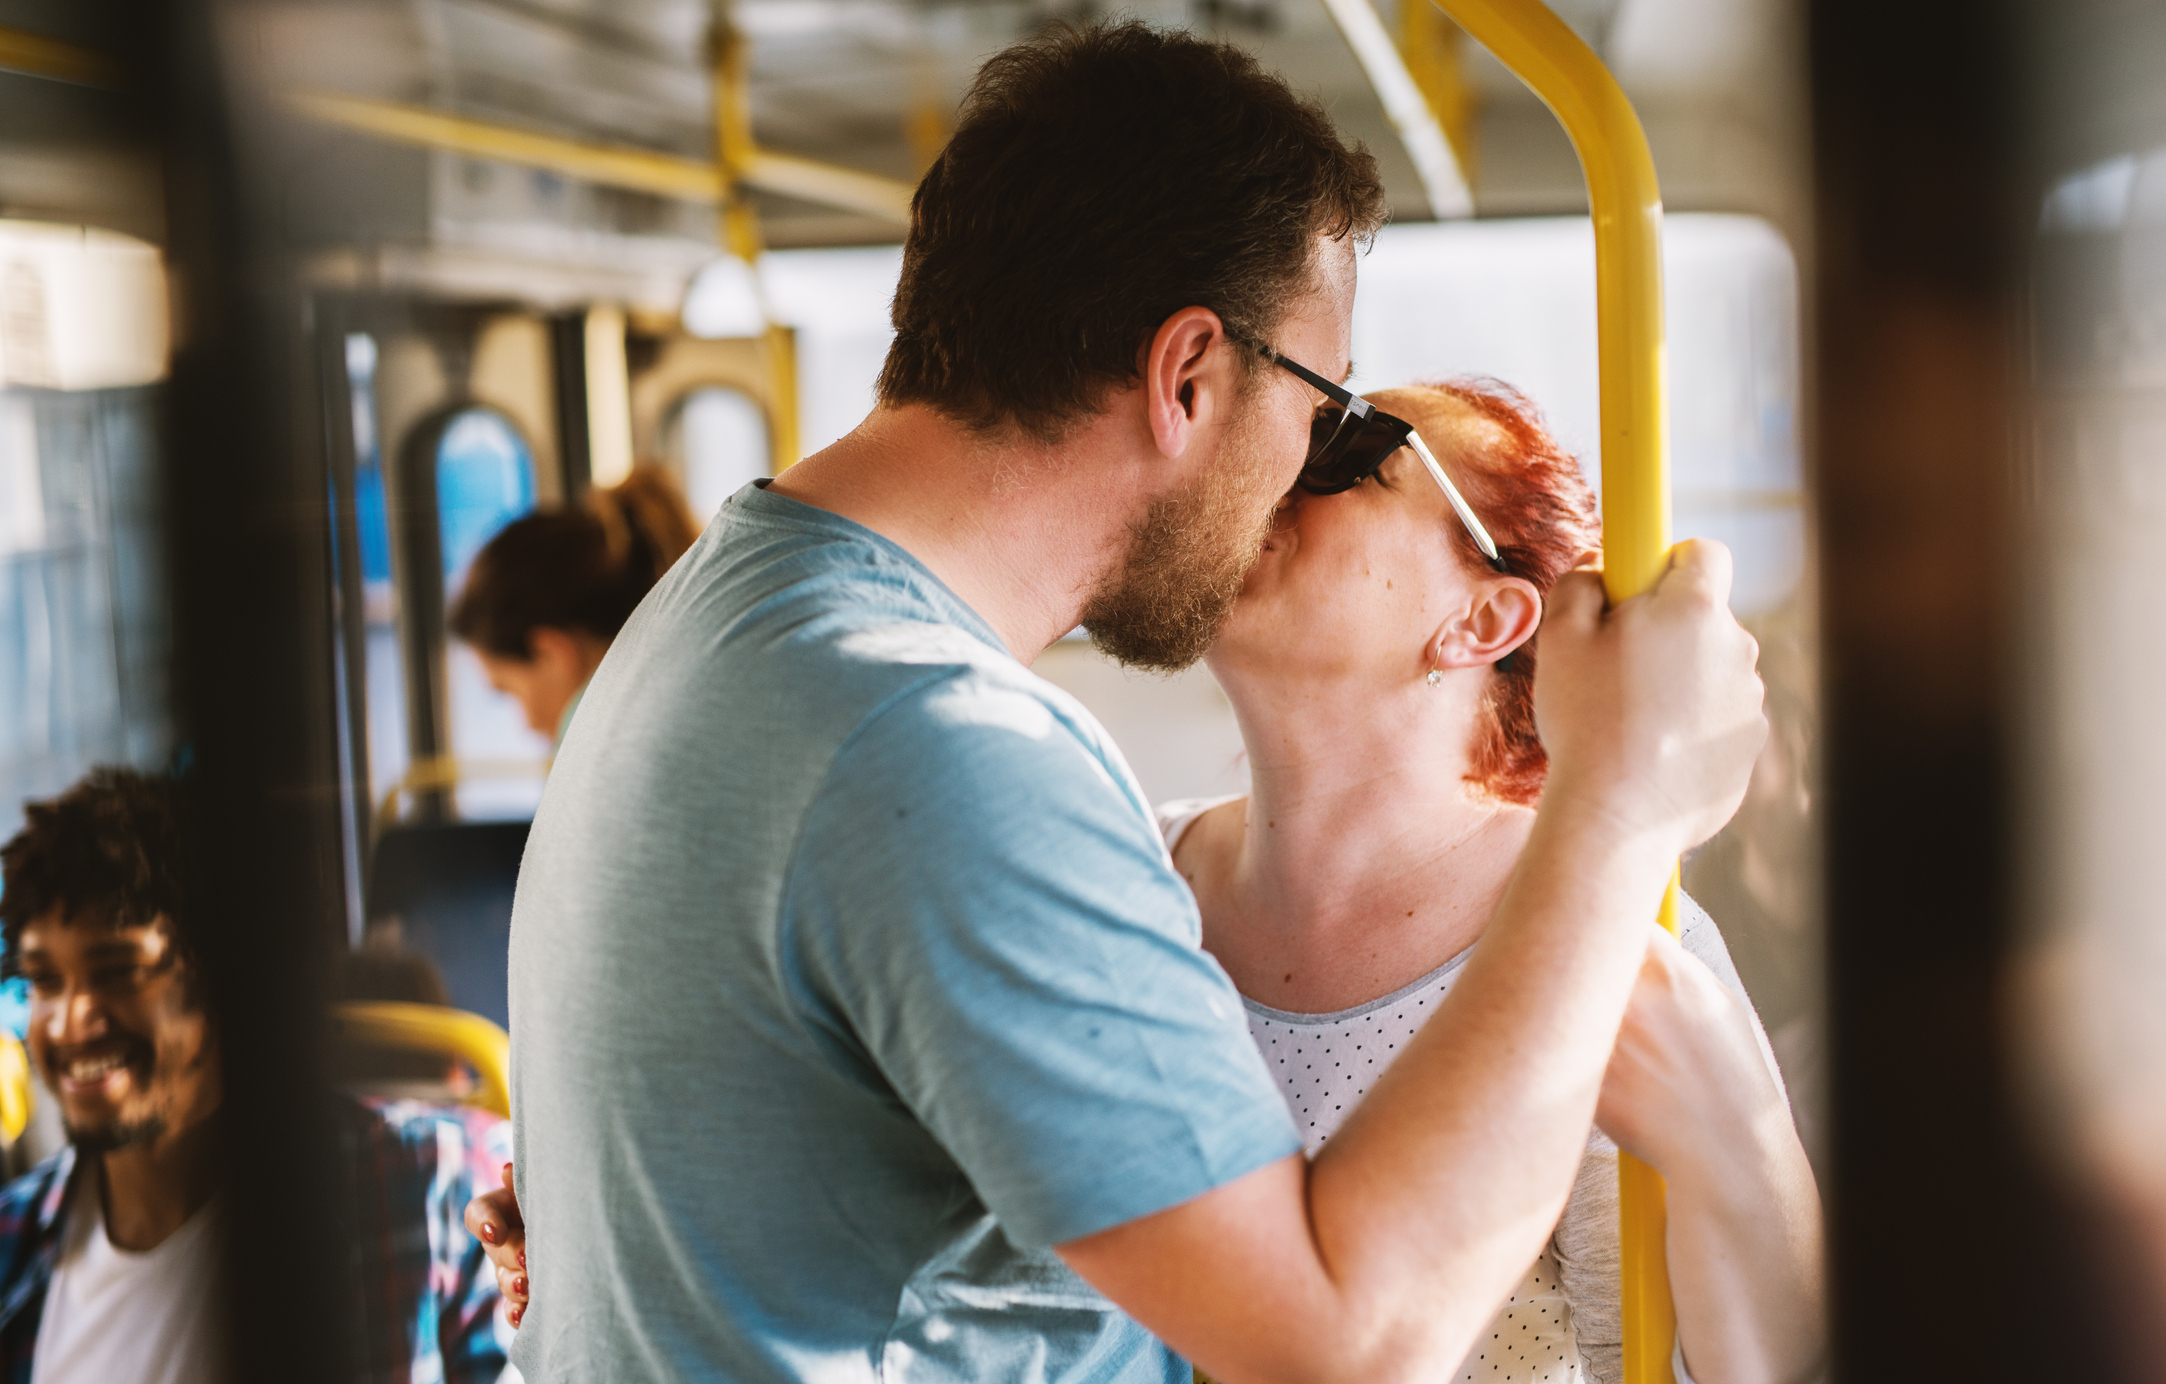 Two people sharing a kiss on a bus, others present, focus on affectionate moment